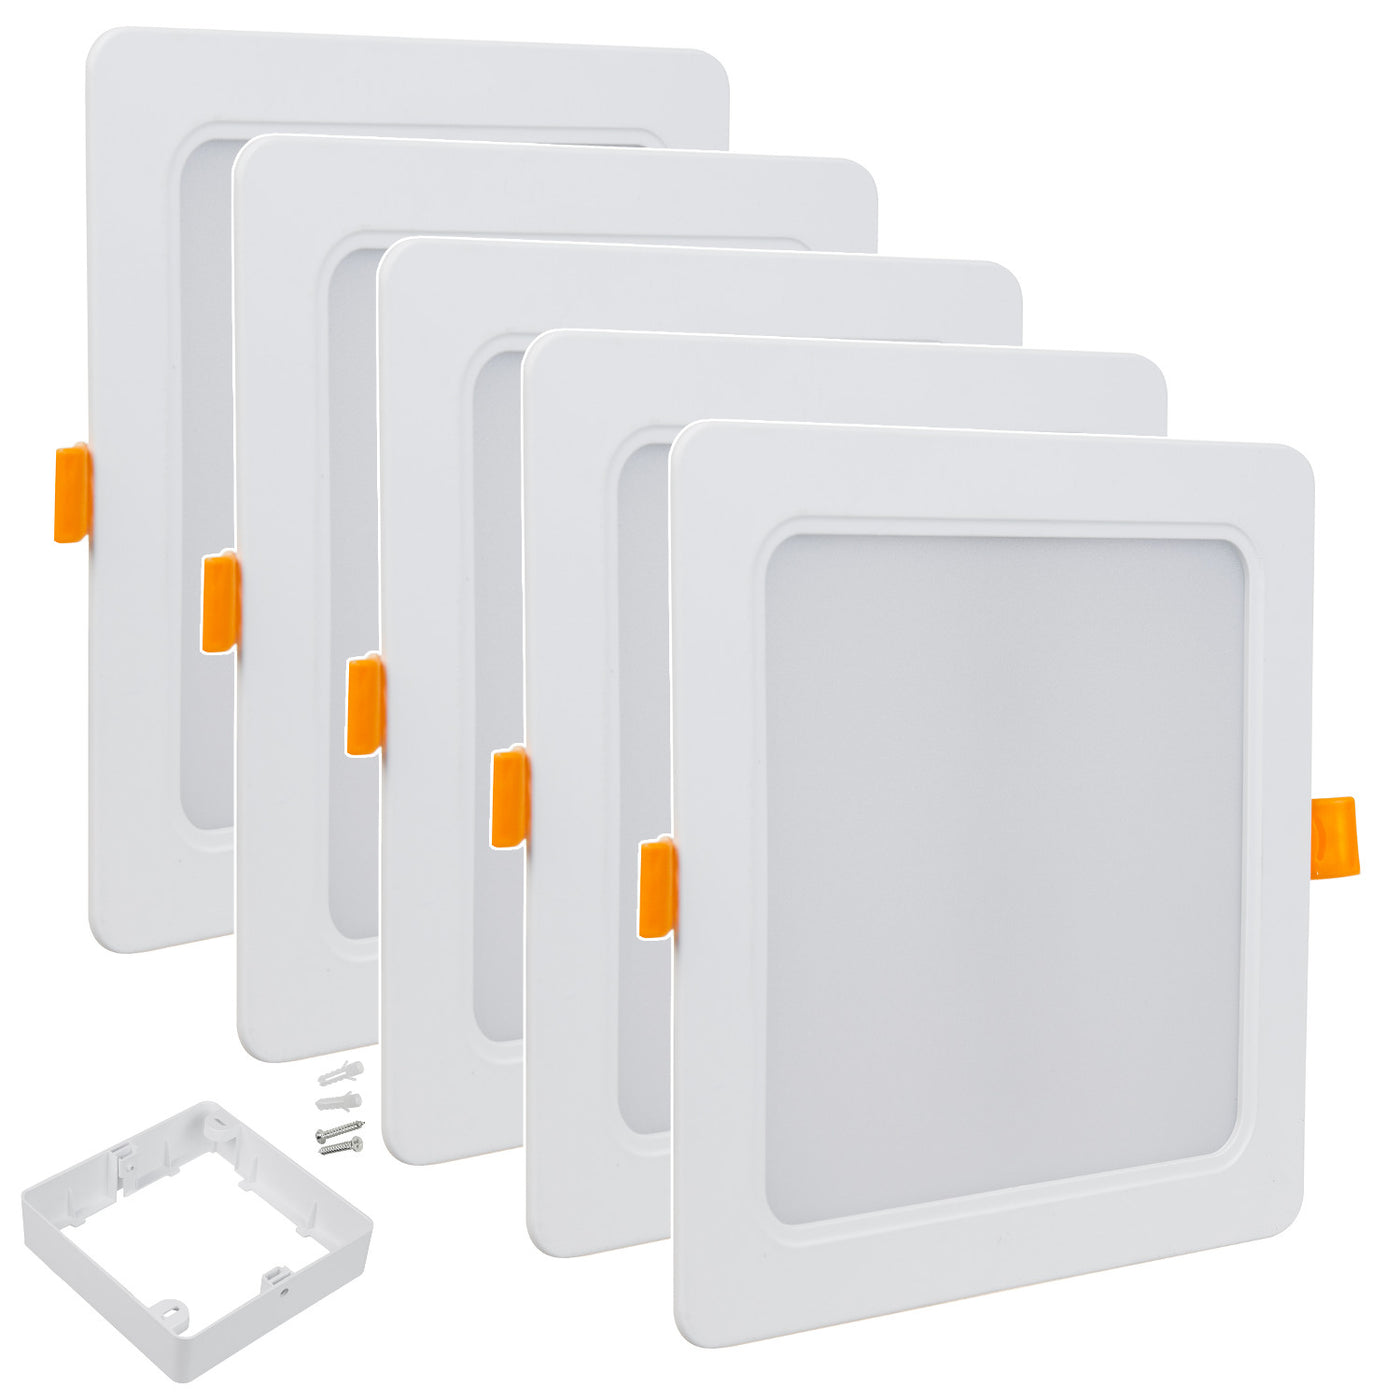 5x panel LED sufitowy Maclean, podtynkowy SLIM, 18W, Neutral White 4000K, 170*170*26mm, 1800lm, MCE374 S + adapter natynkowy MCE379 S